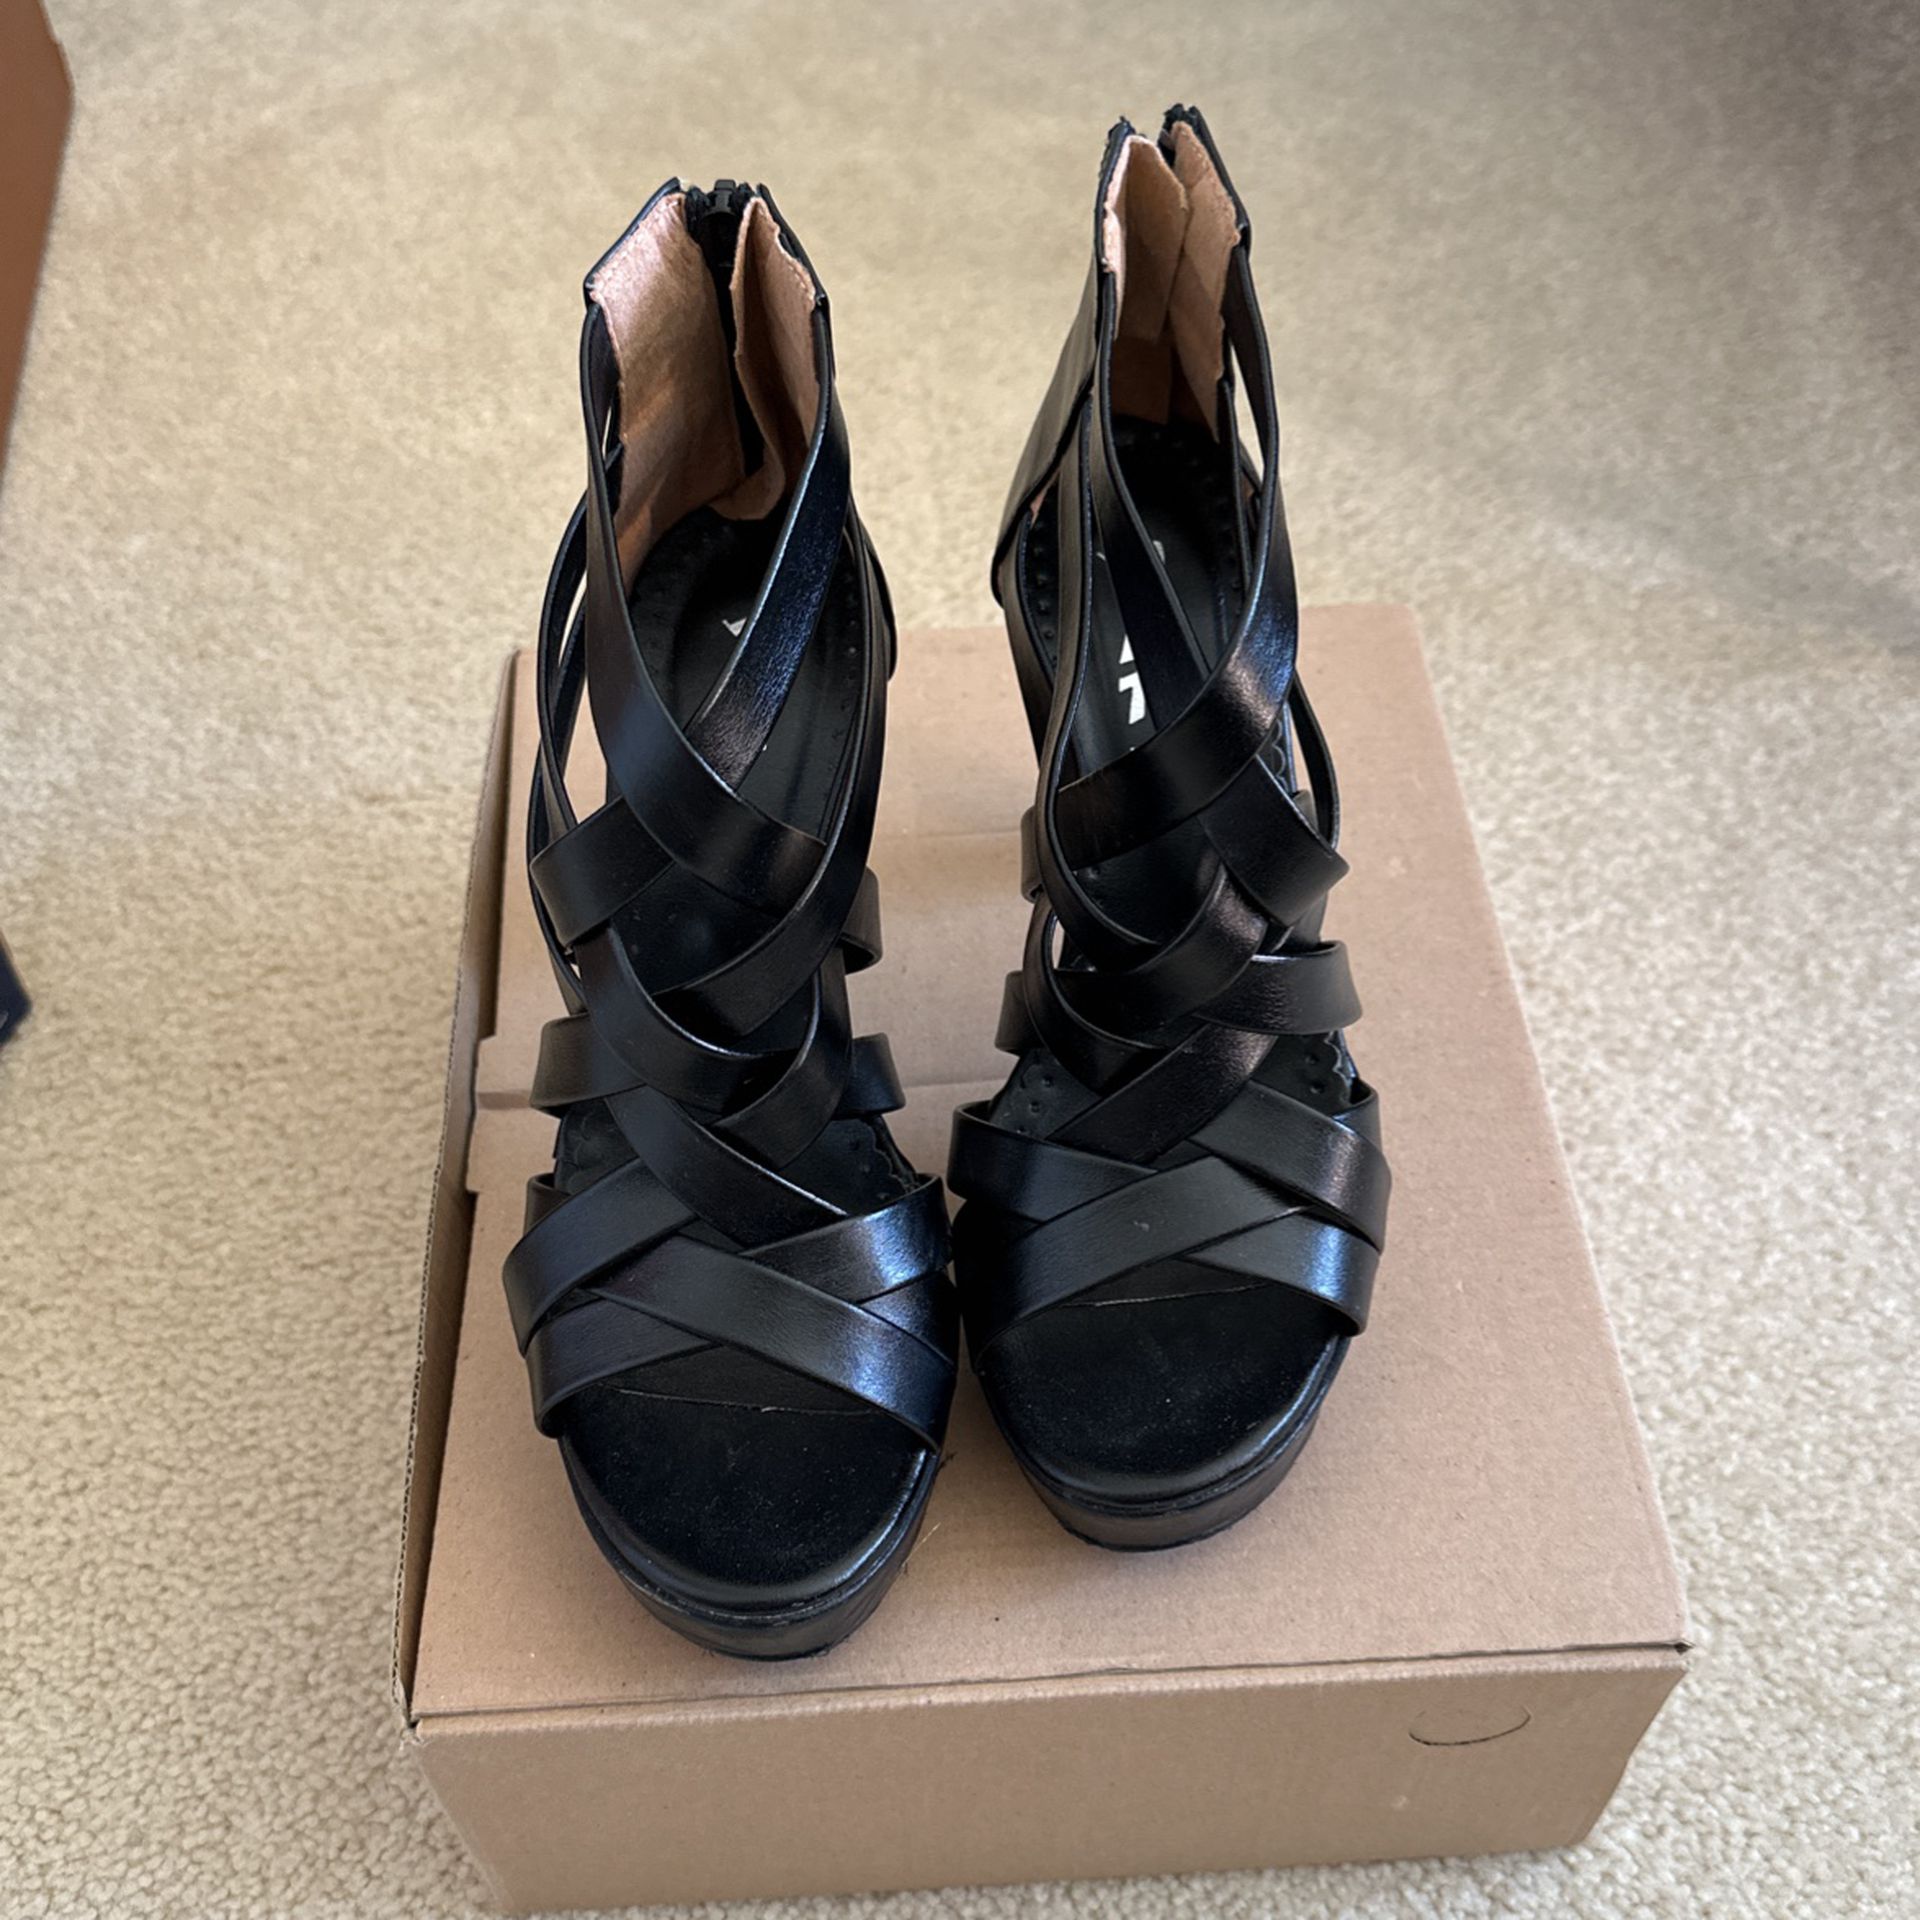 Women's Black High-Heel With Zipper On The Back Size 6